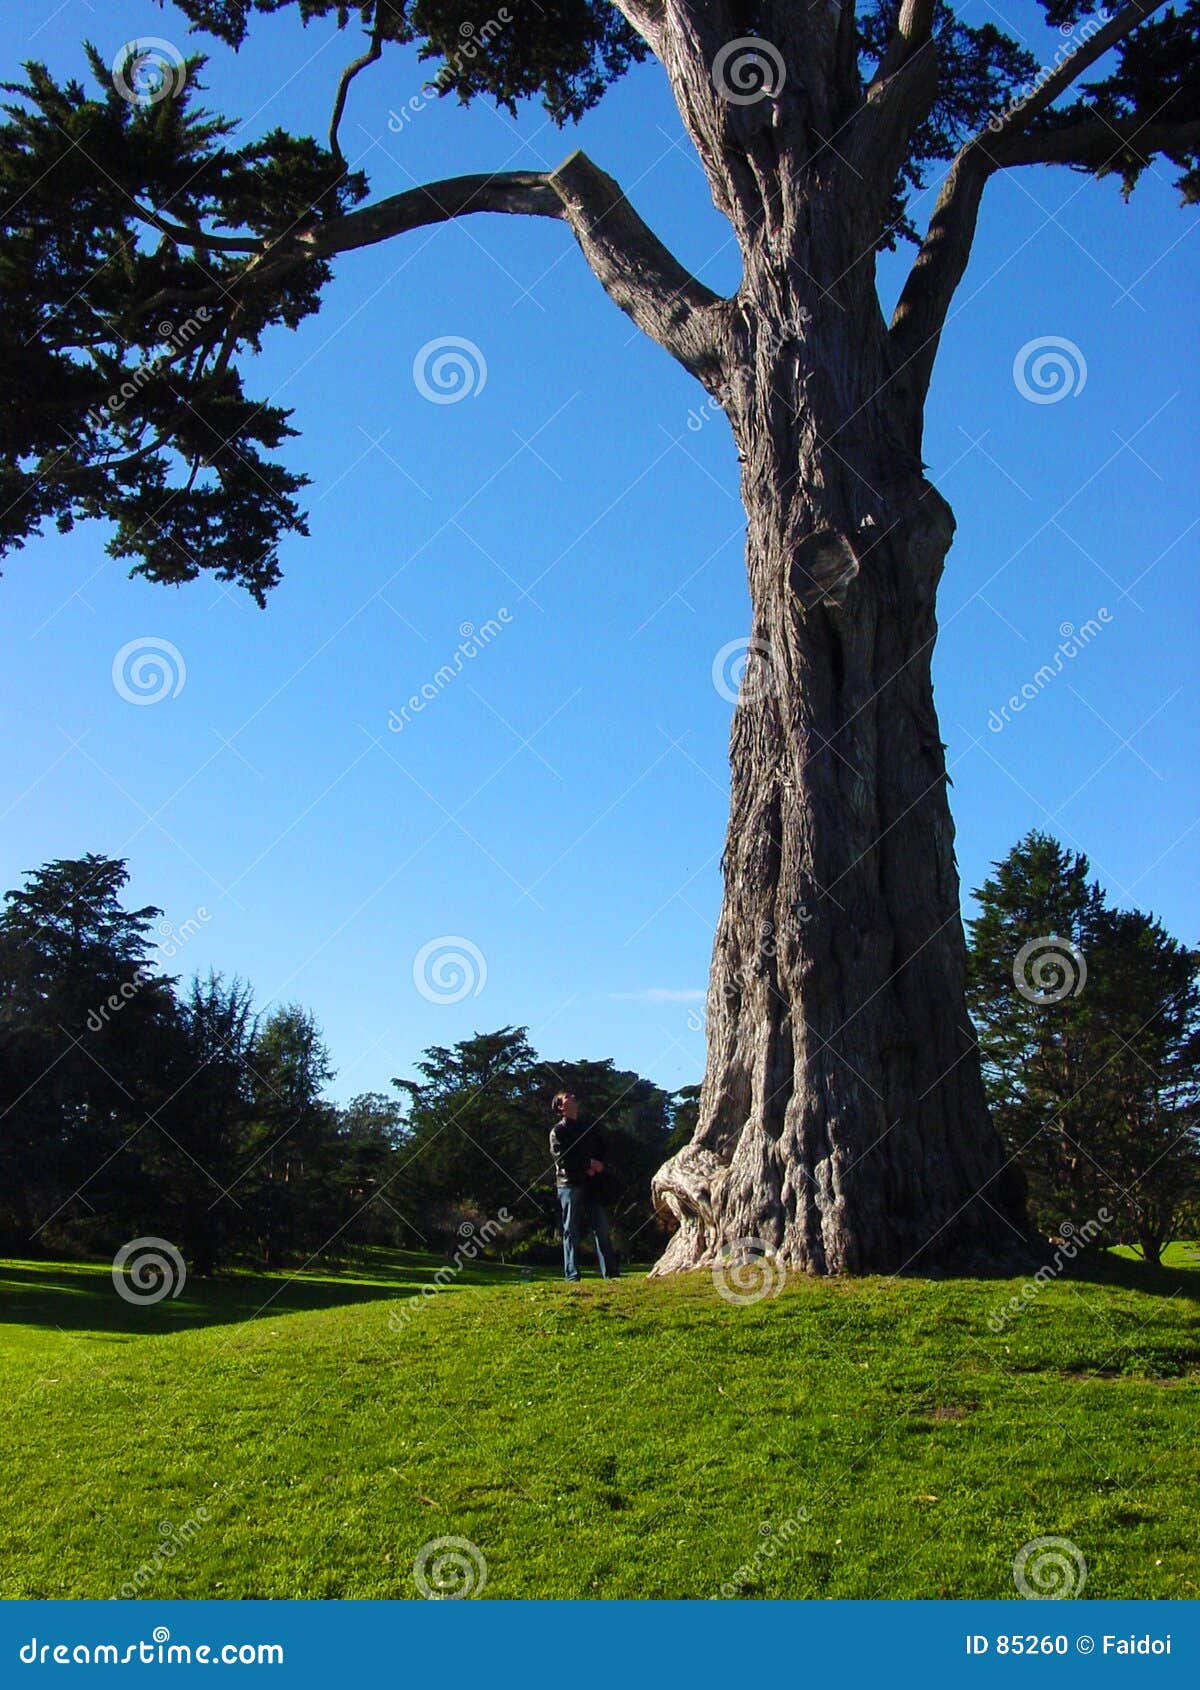 Tall Tree Stock Photo Image Of Growth Look Large Outdoor